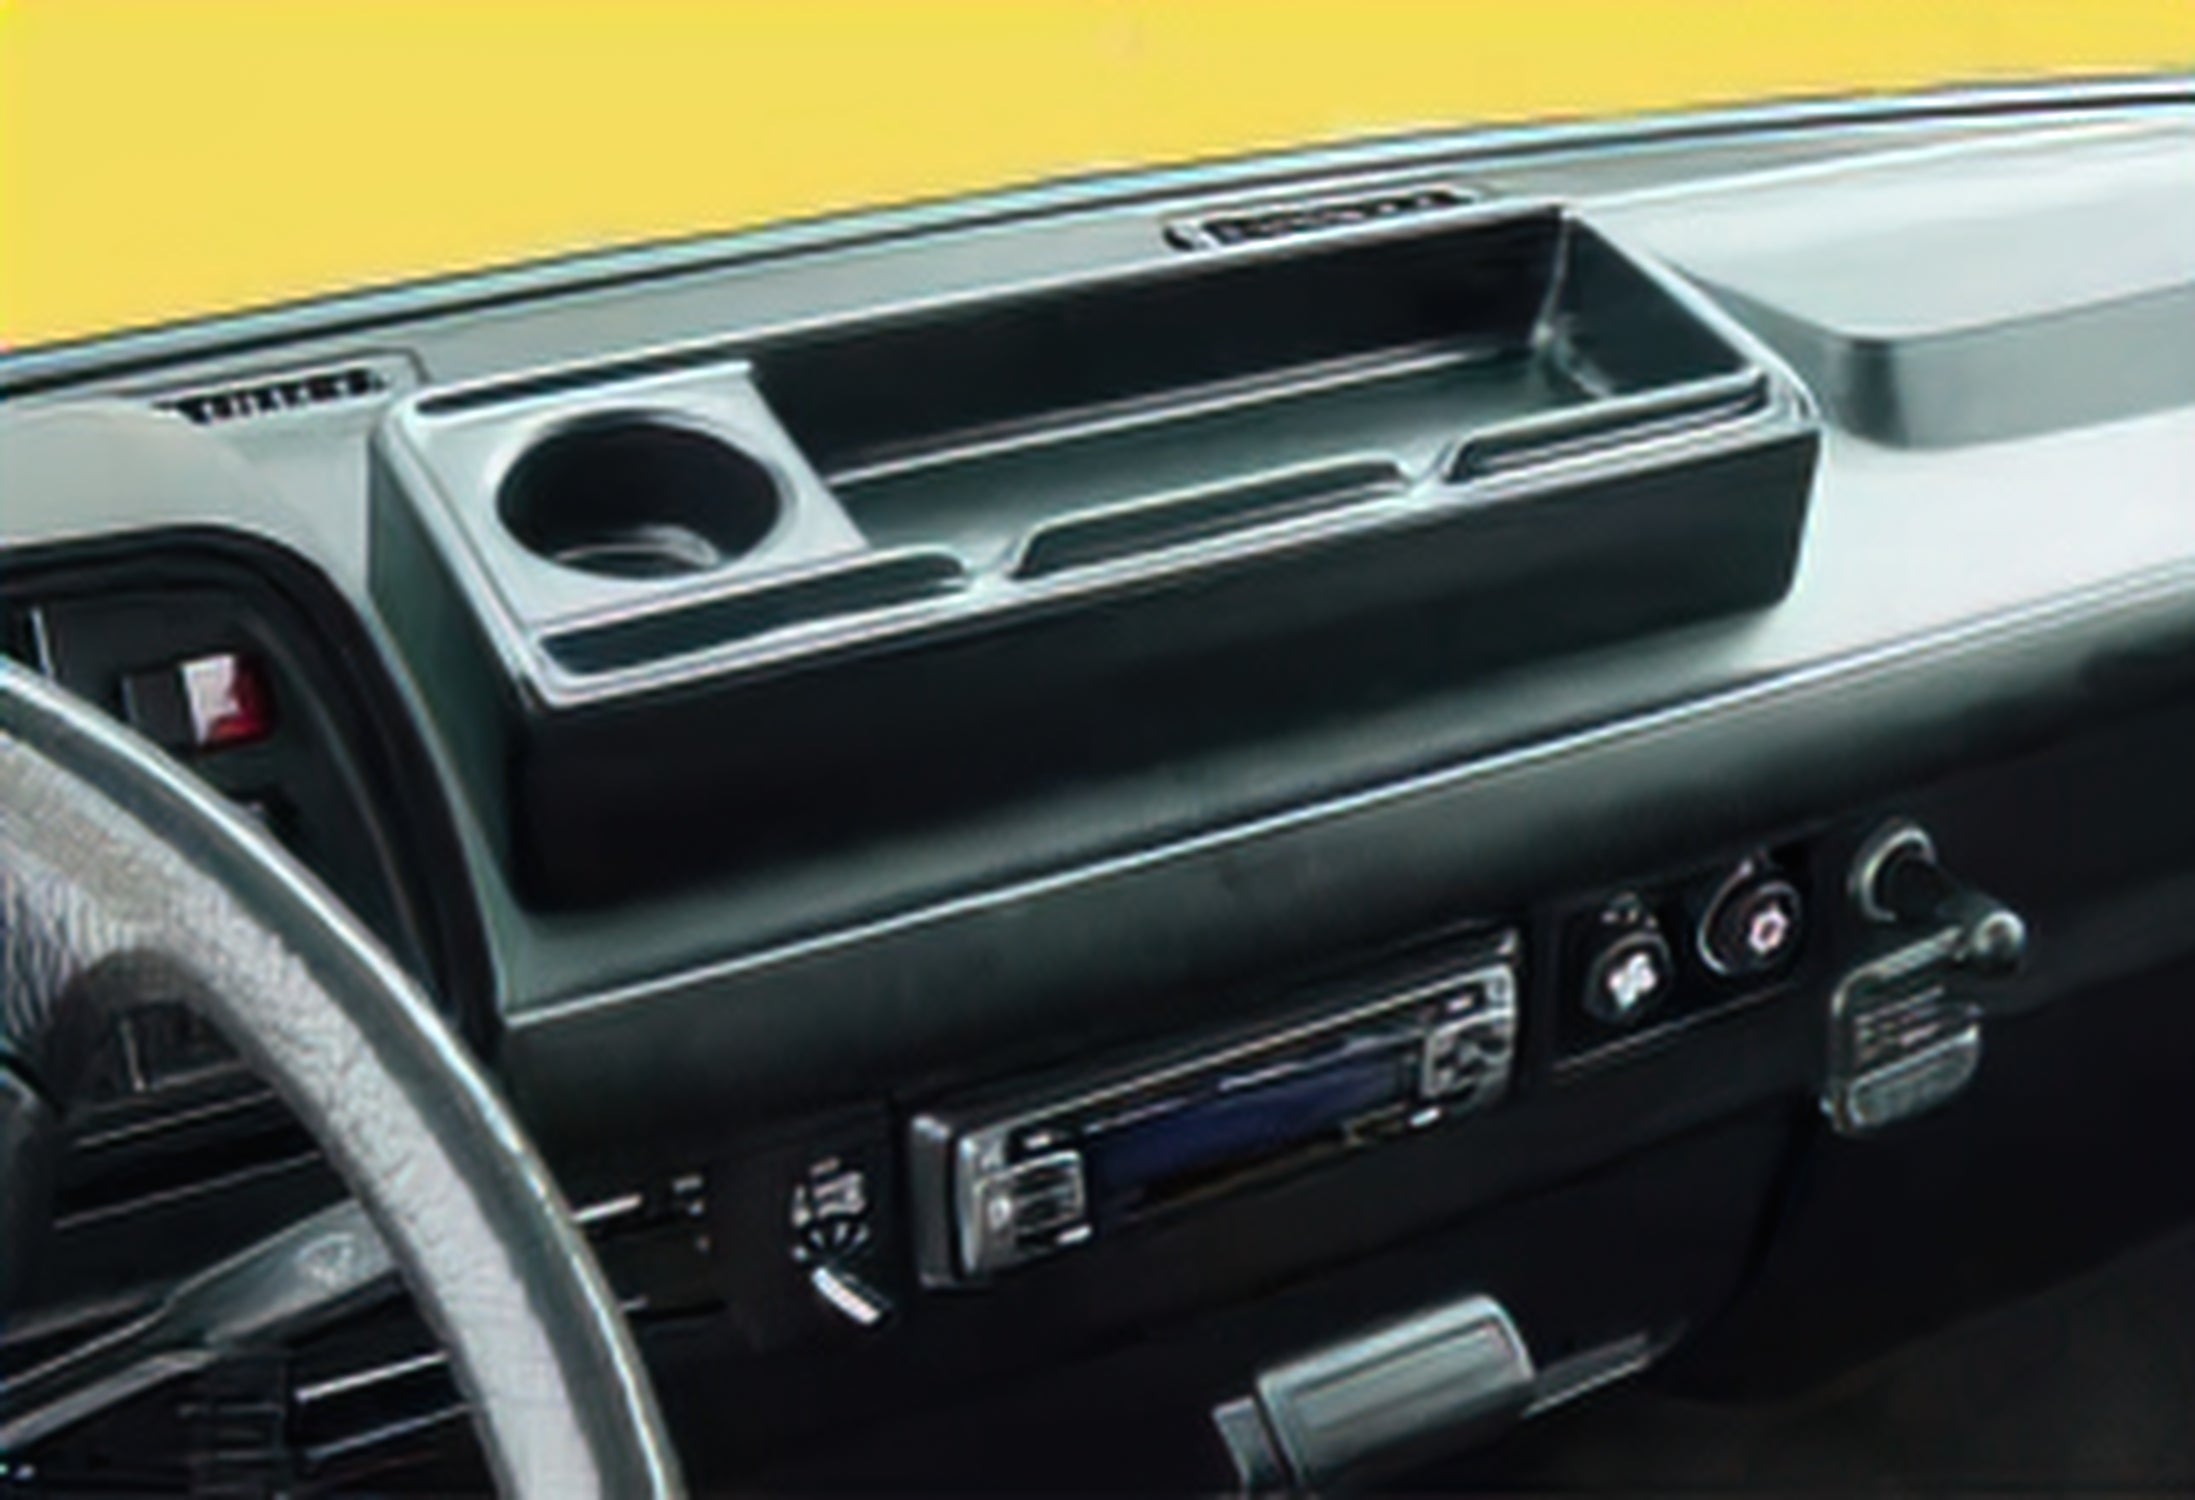 Cup holder insert for center console cubby – GoWesty